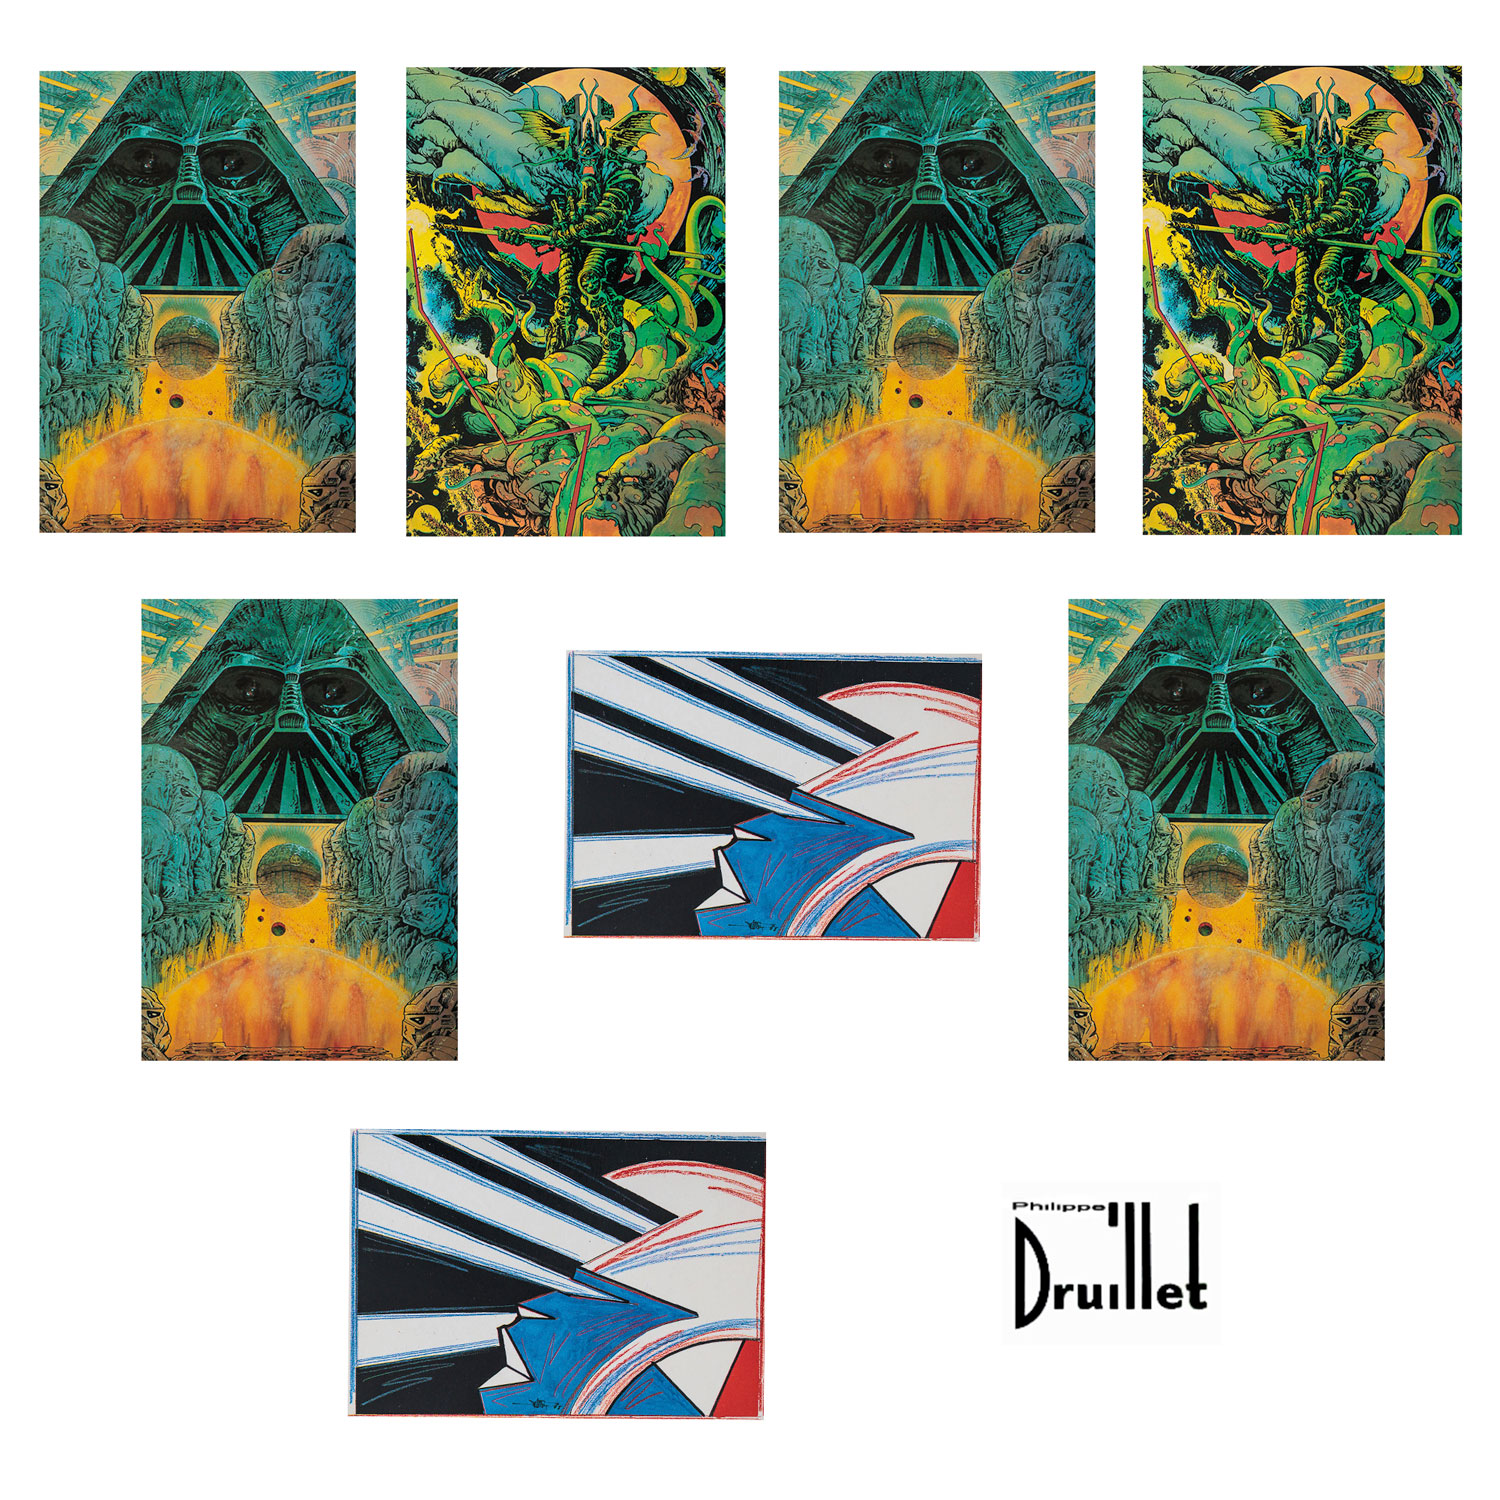 Philippe Druillet collector Postcards